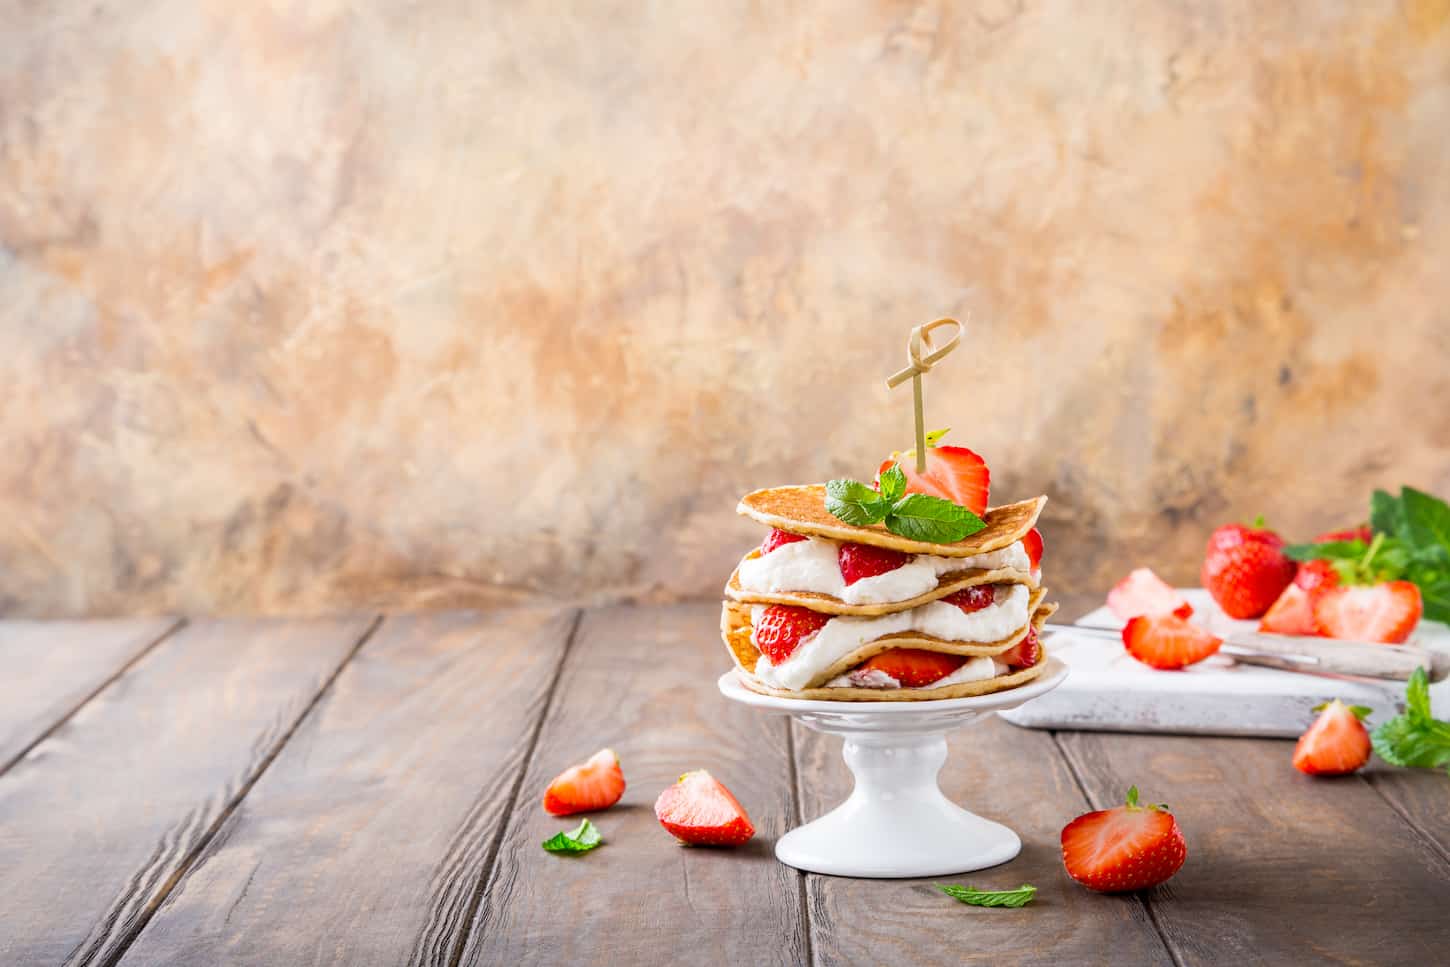 An image of a Small cake made of pancakes with cream and strawberries on a white porcelain cake stand.